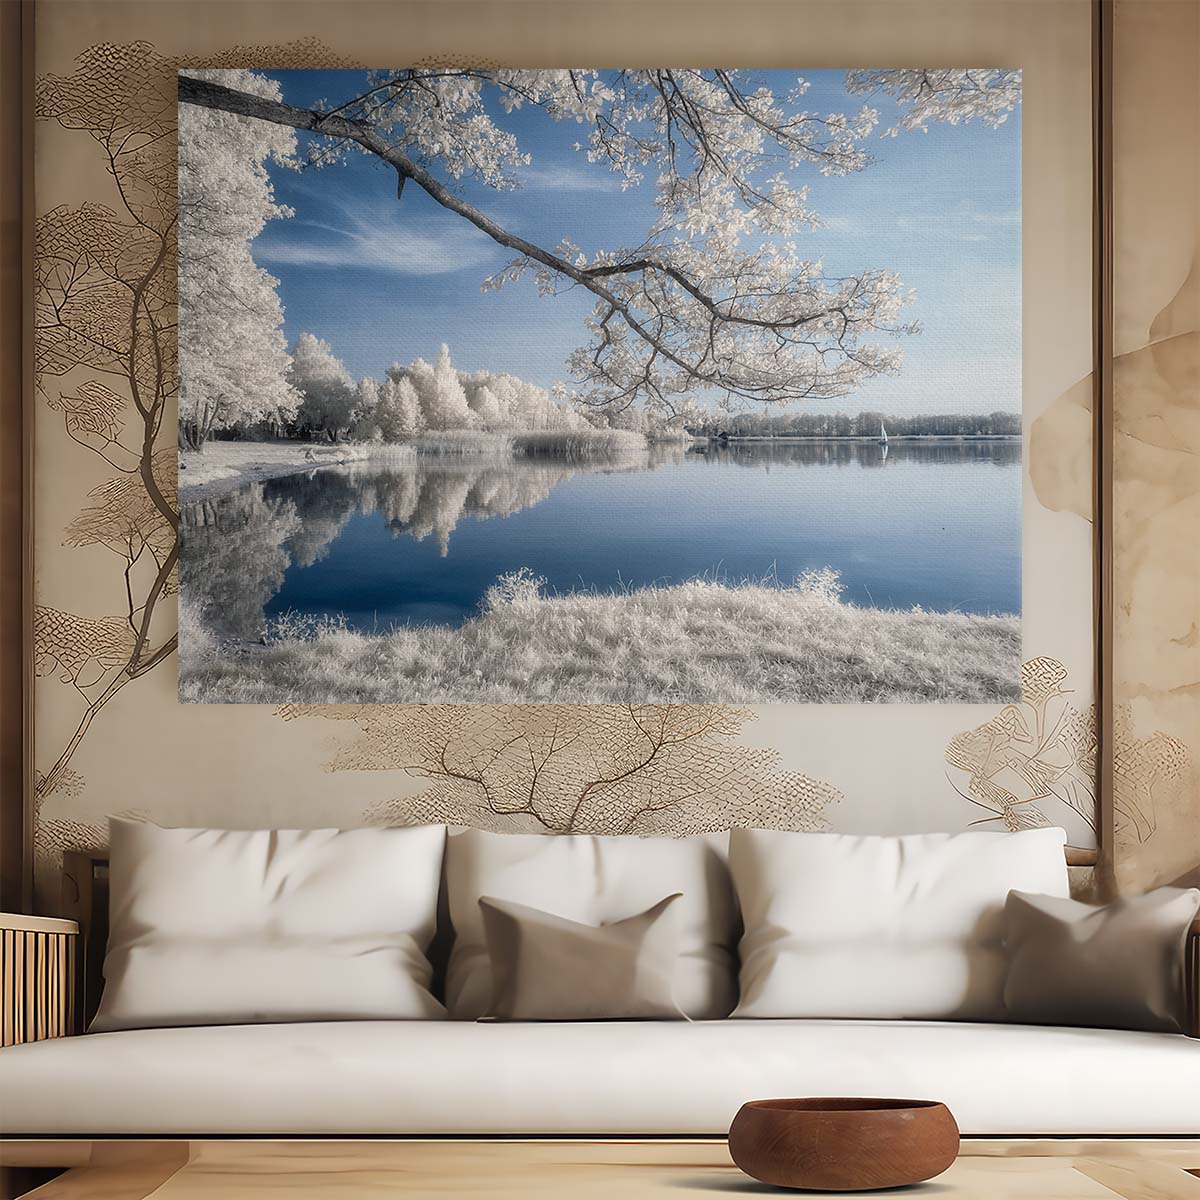 Serene Zdworskie Lake Reflection Wall Art by Luxuriance Designs. Made in USA.